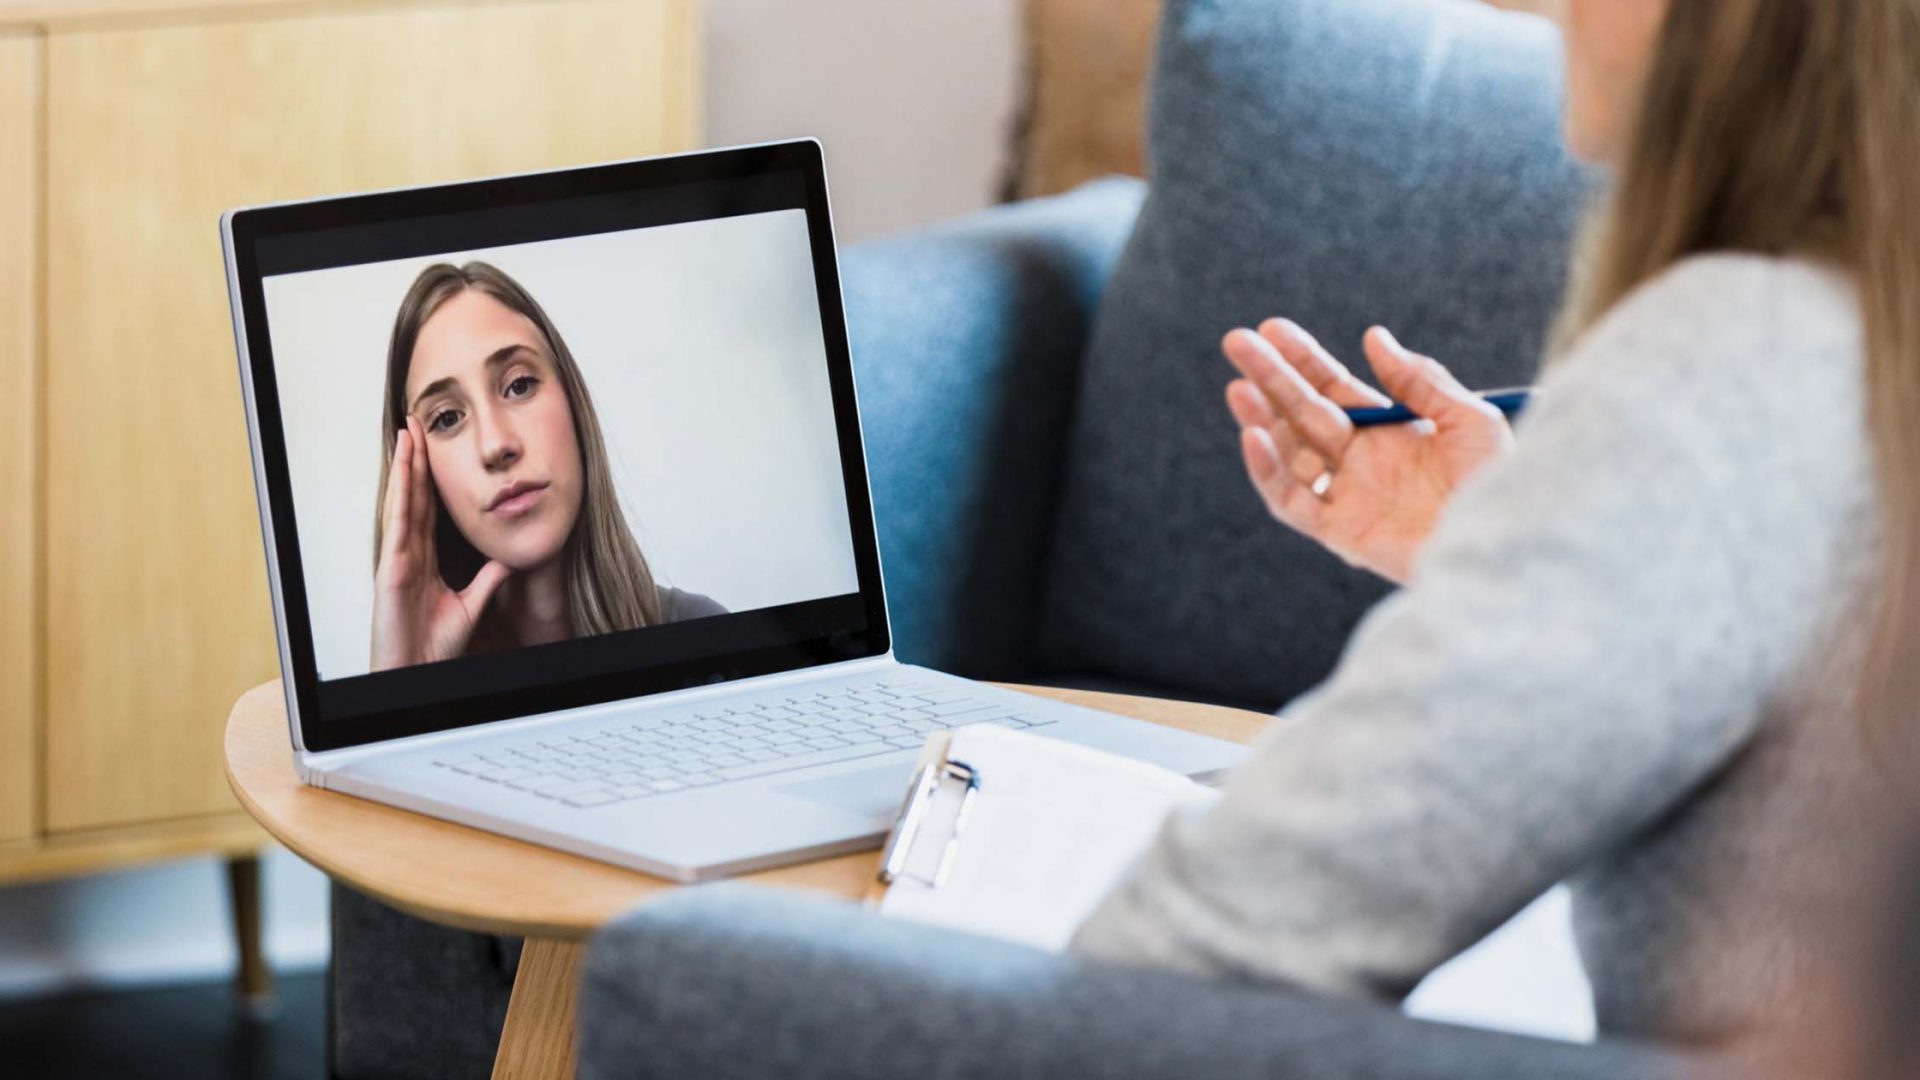 Physician Conducts Telepsychiatry Visit